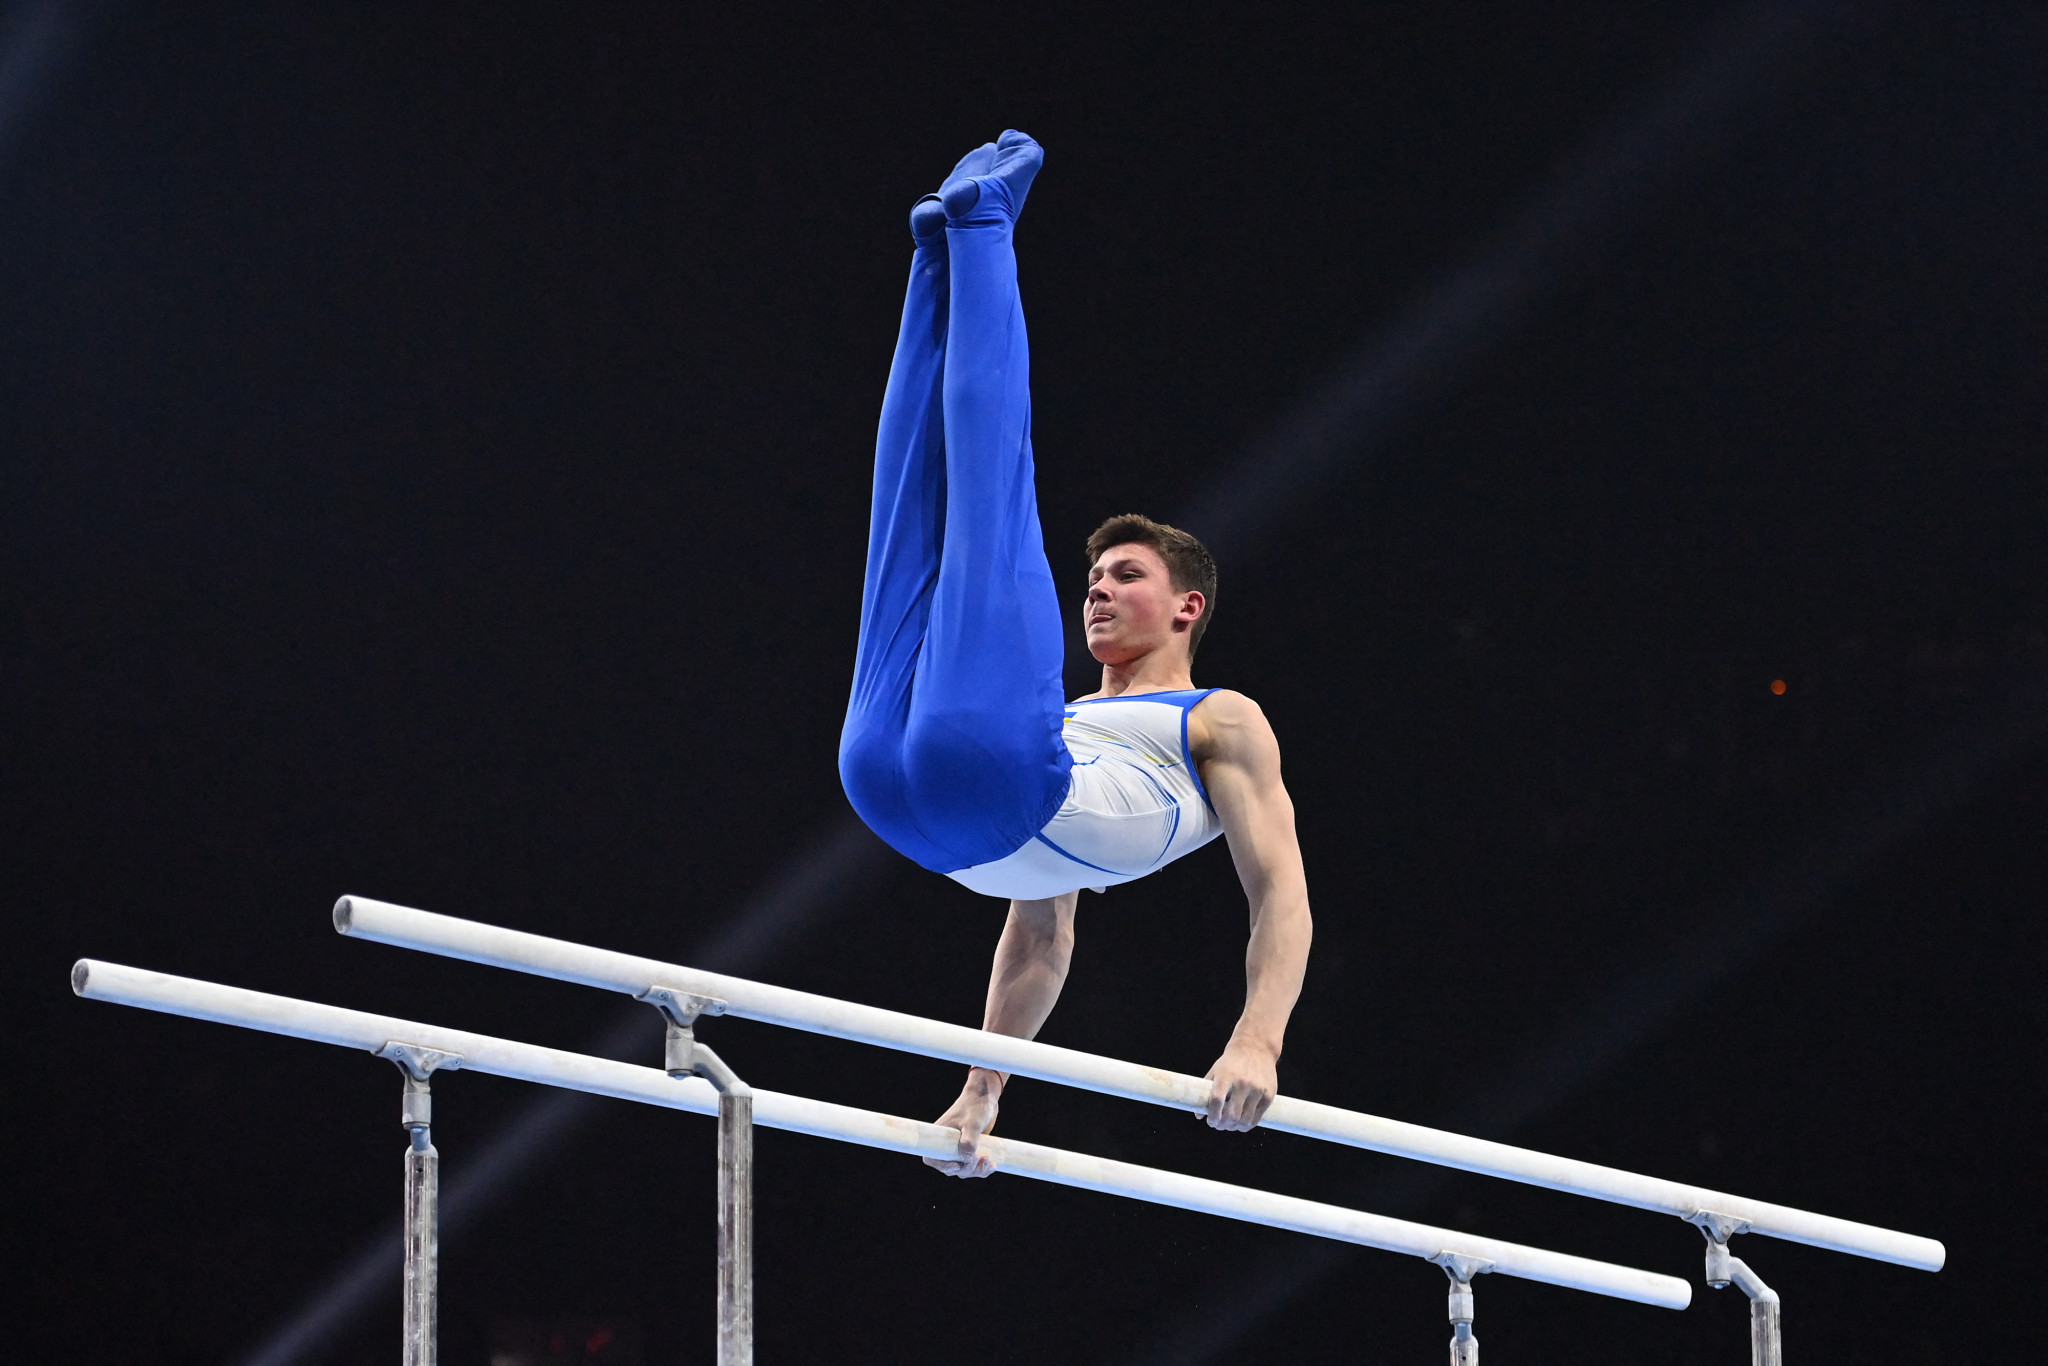 Ukraine’s Kovtun wins at Gymnastics World Cup as Kuliak courts controversy with symbol linked to war 